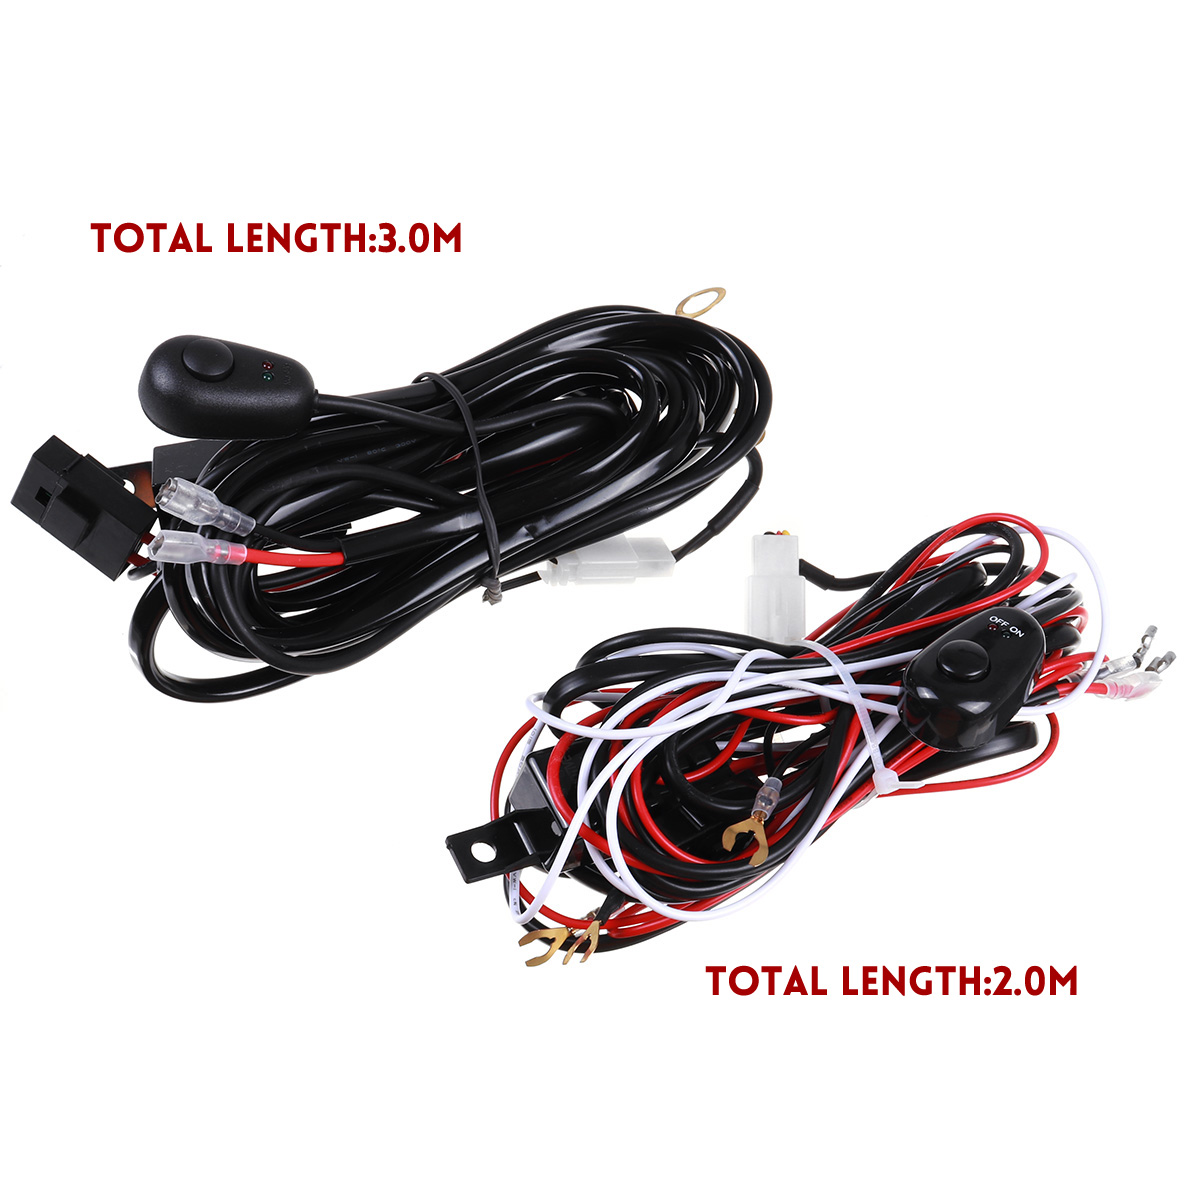 NEW 12V 3m Twin Harness Wiring kit Includes Switch & Relay for Spot/Fog Lights